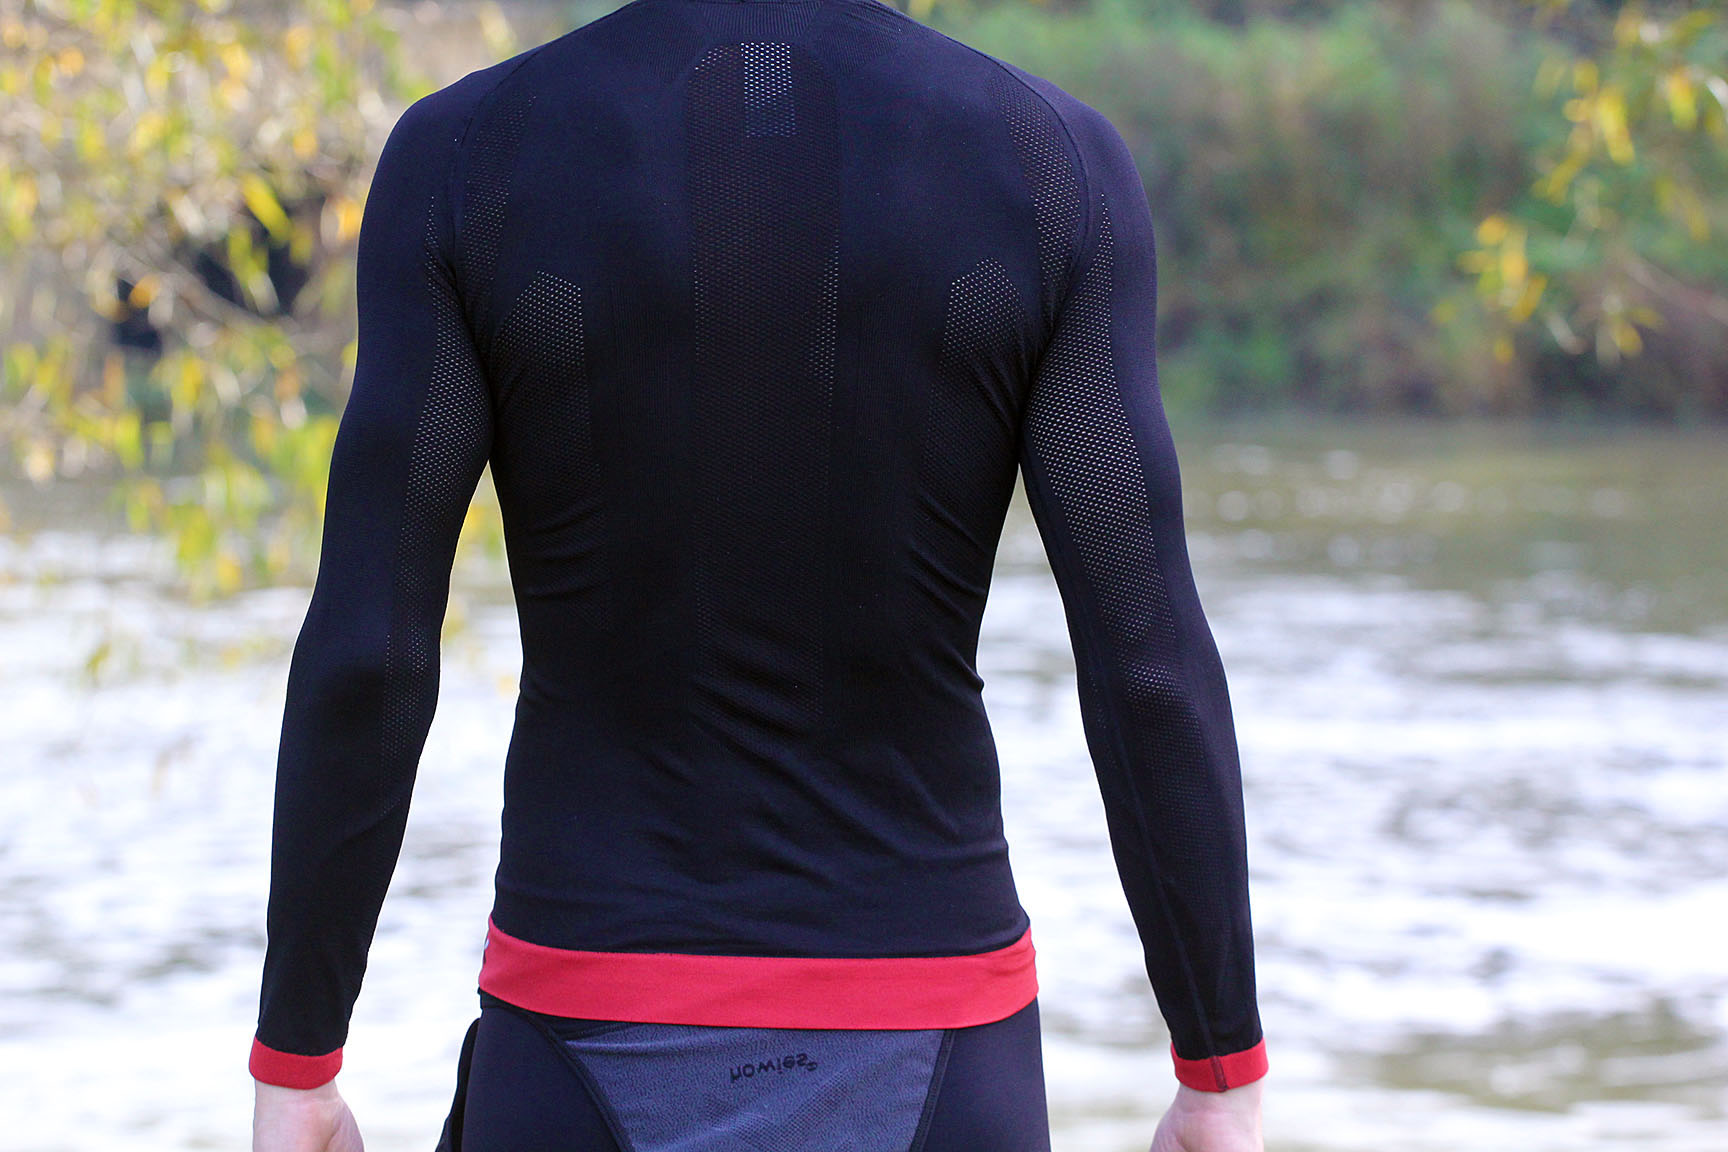 15 Of The Best Cycling Base Layers Undershirts For All Seasons within Cycling Base Layer Benefits